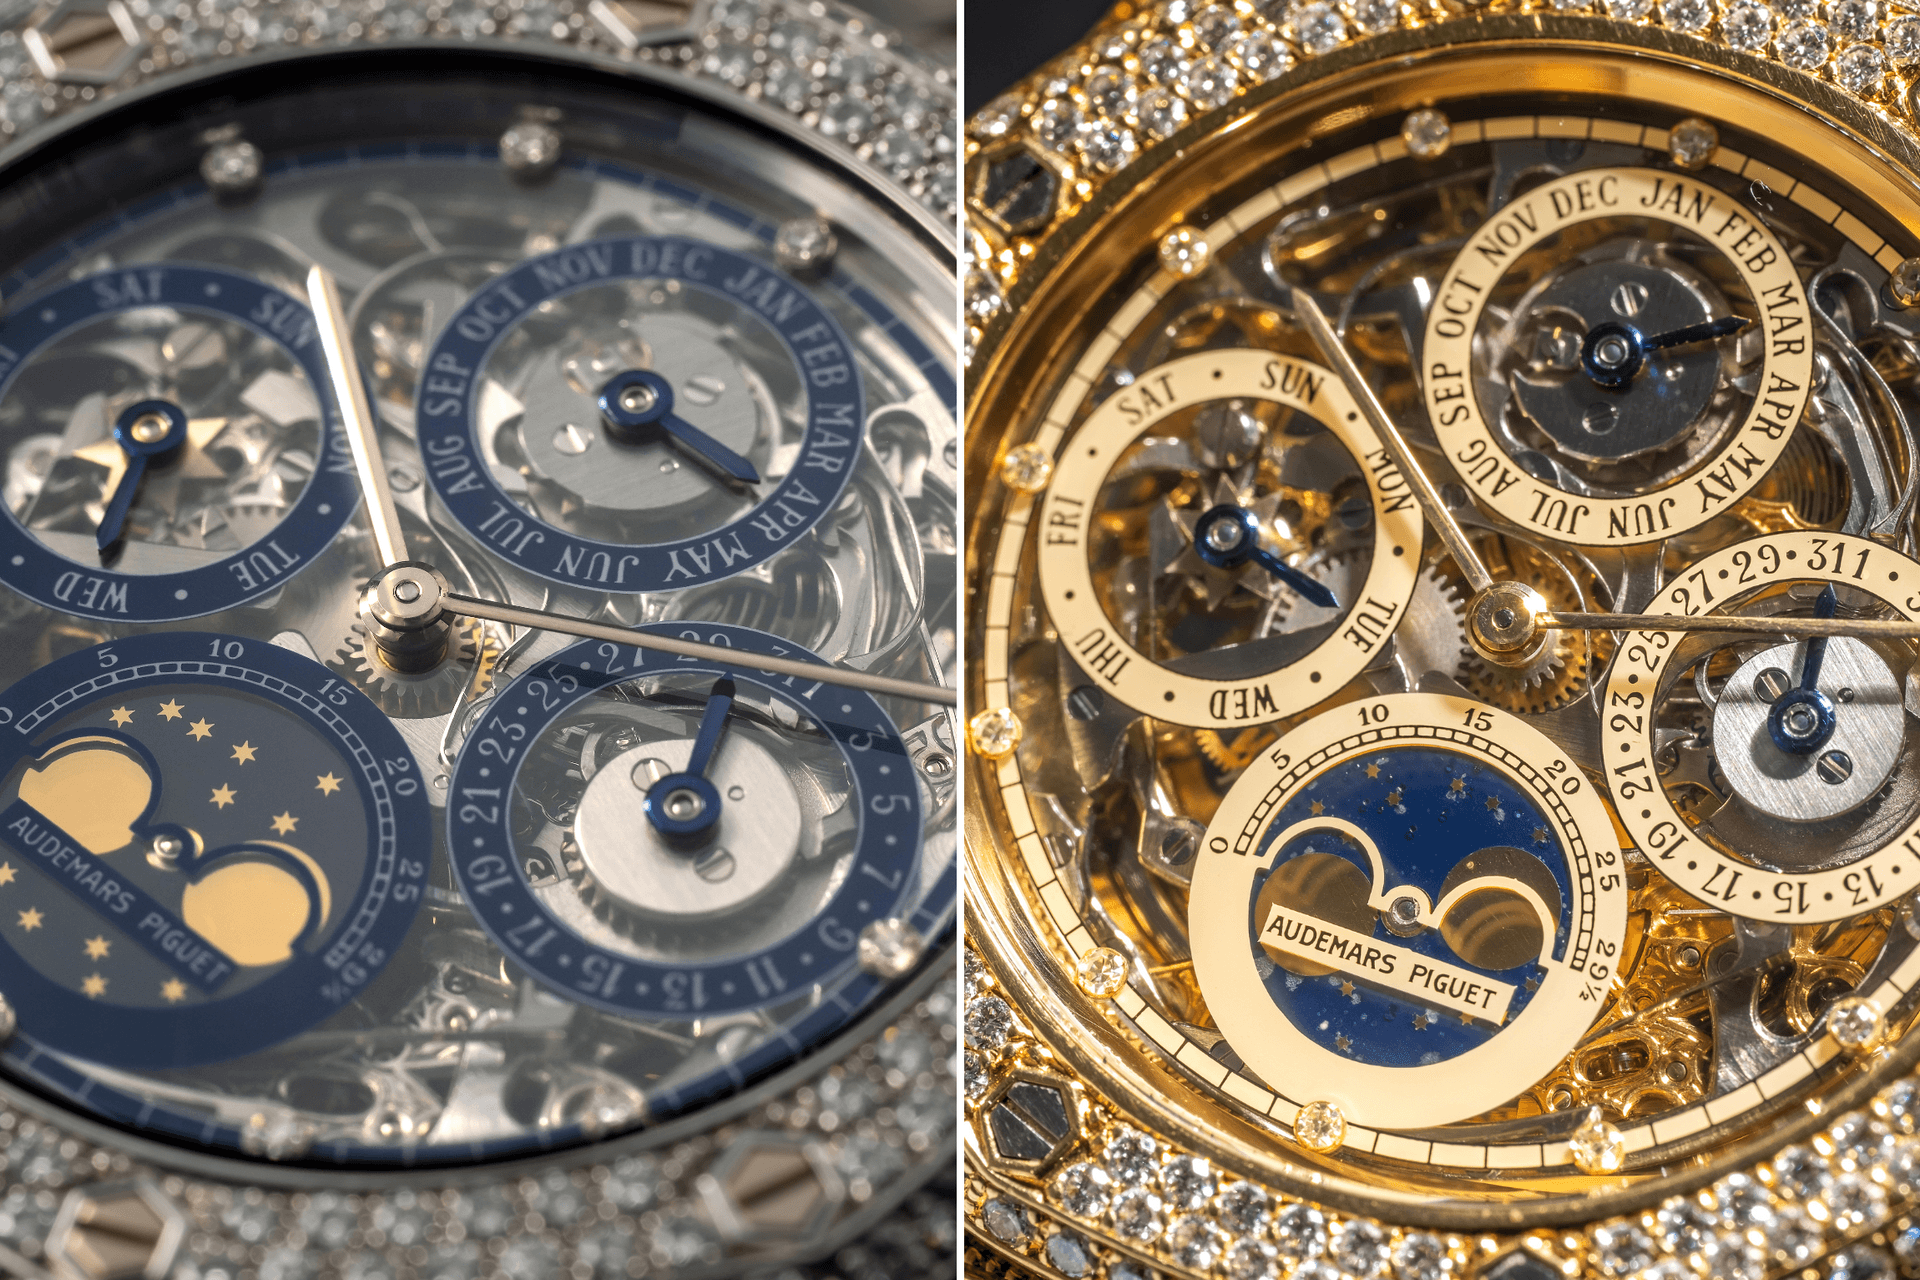 From 1988 to 1995, a totally gem set openwork perpetual calendar, Audemars Piguet Ref. 25659, was made in only four pieces, three in yellow gold and one in platinum